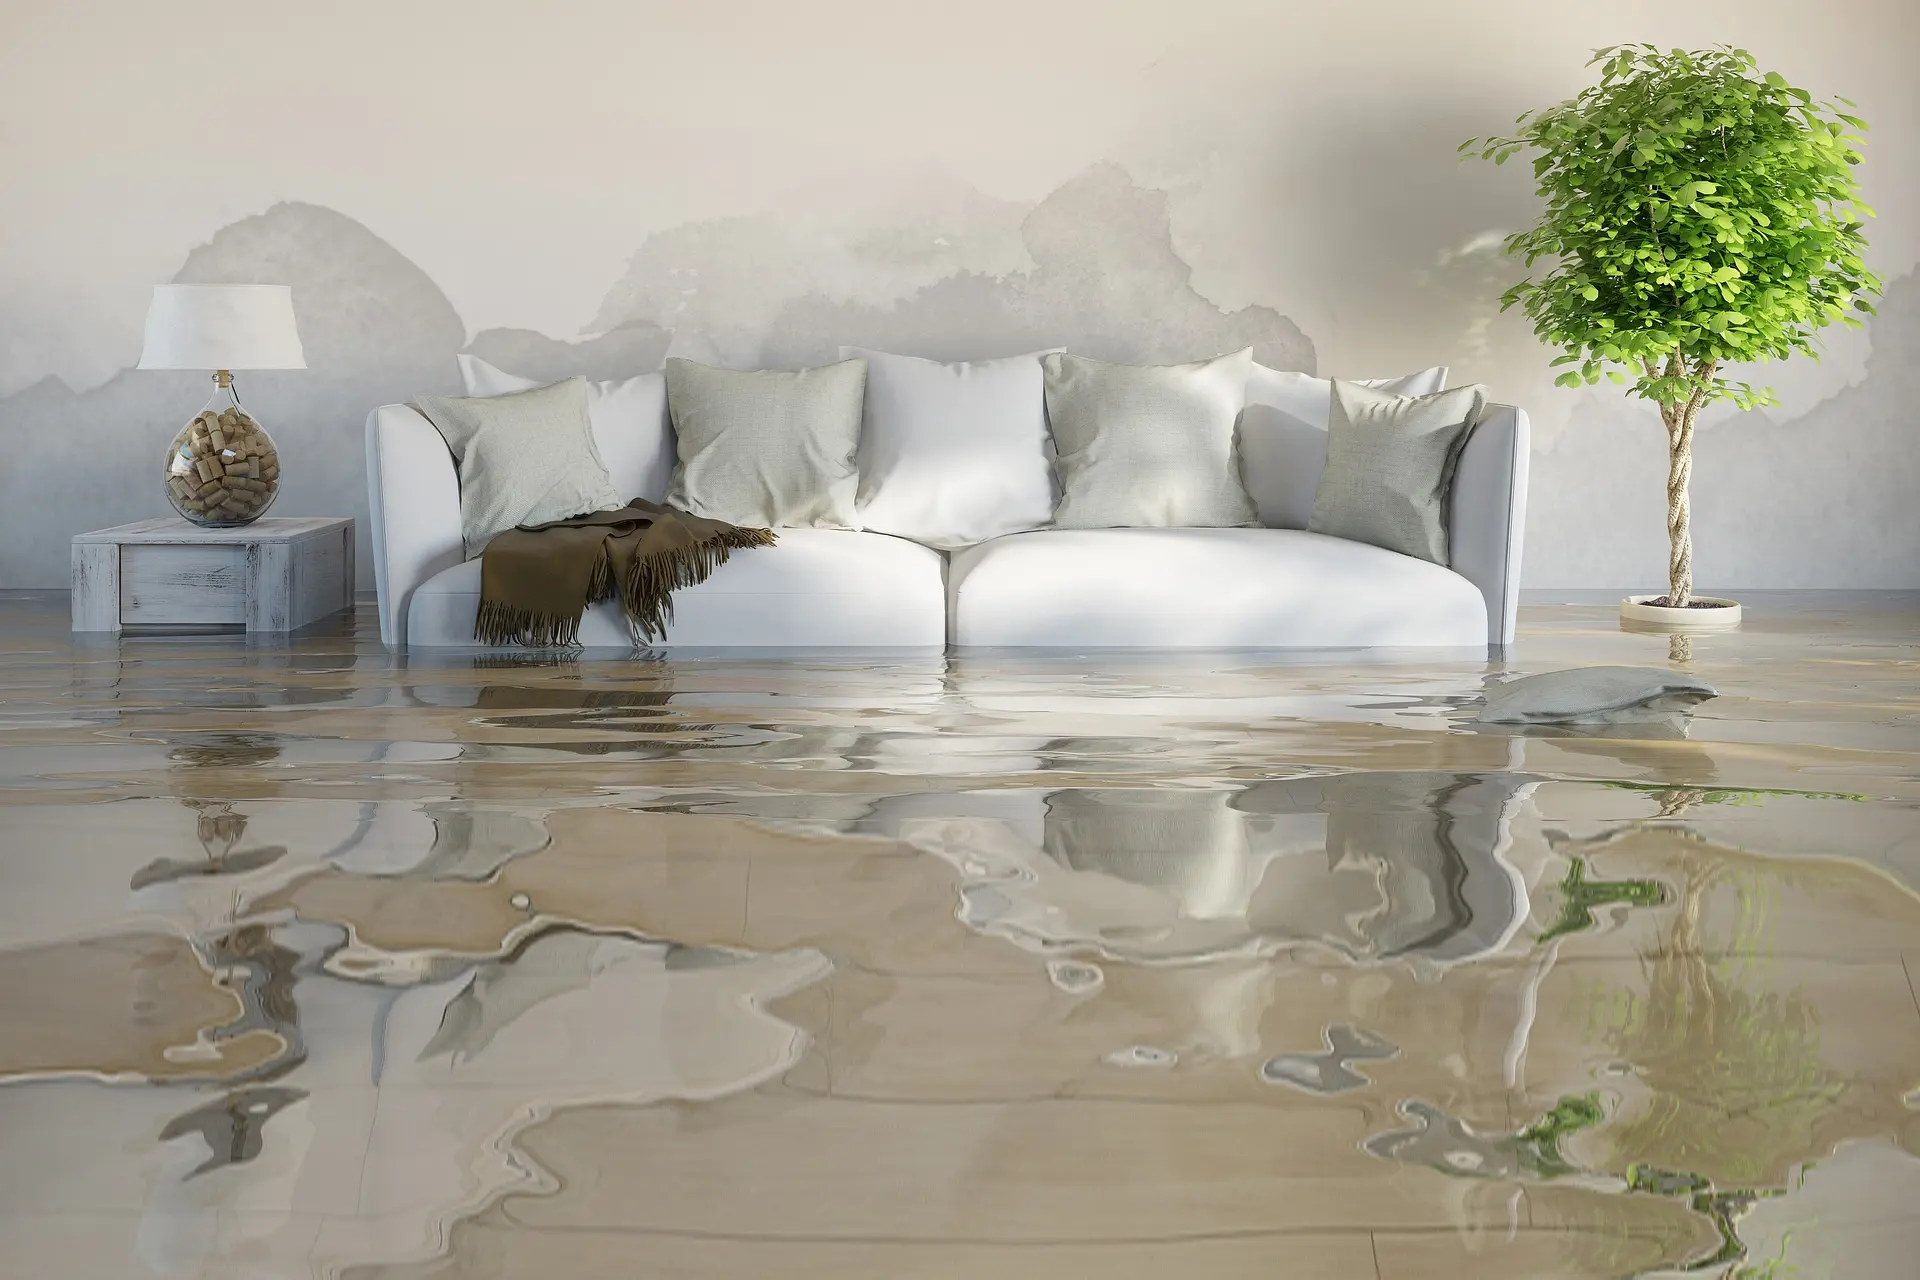 How to Handle Water Damage Emergencies: Professional Restoration Services in Austin Texas